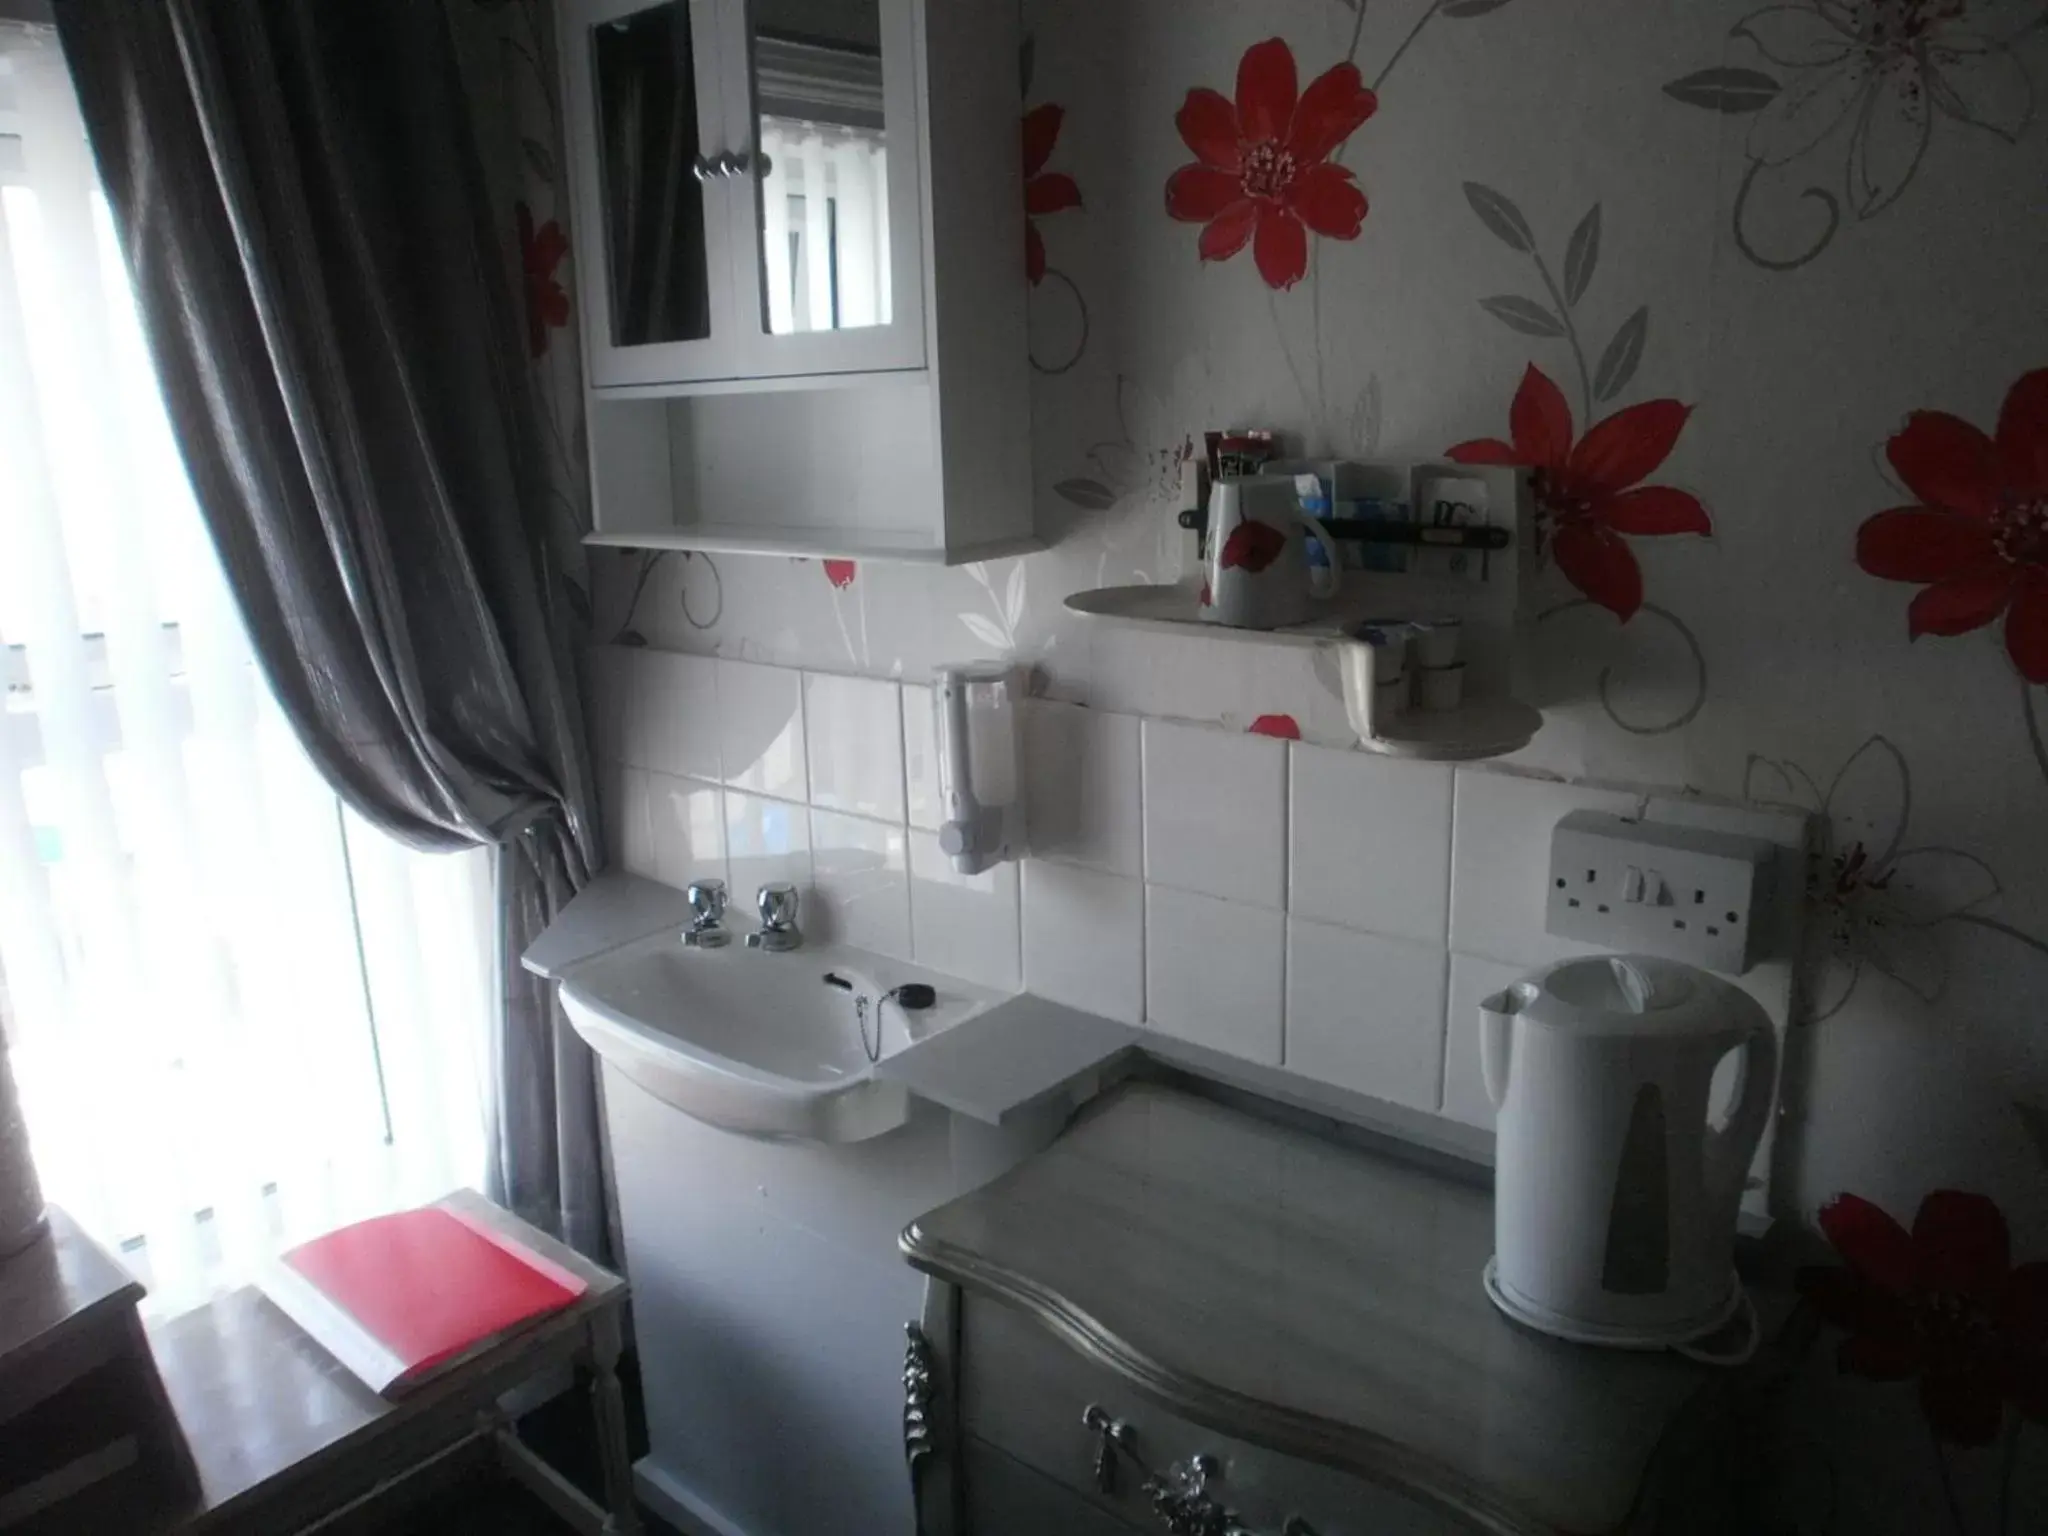 Coffee/tea facilities, Bathroom in The Withnell Hotel